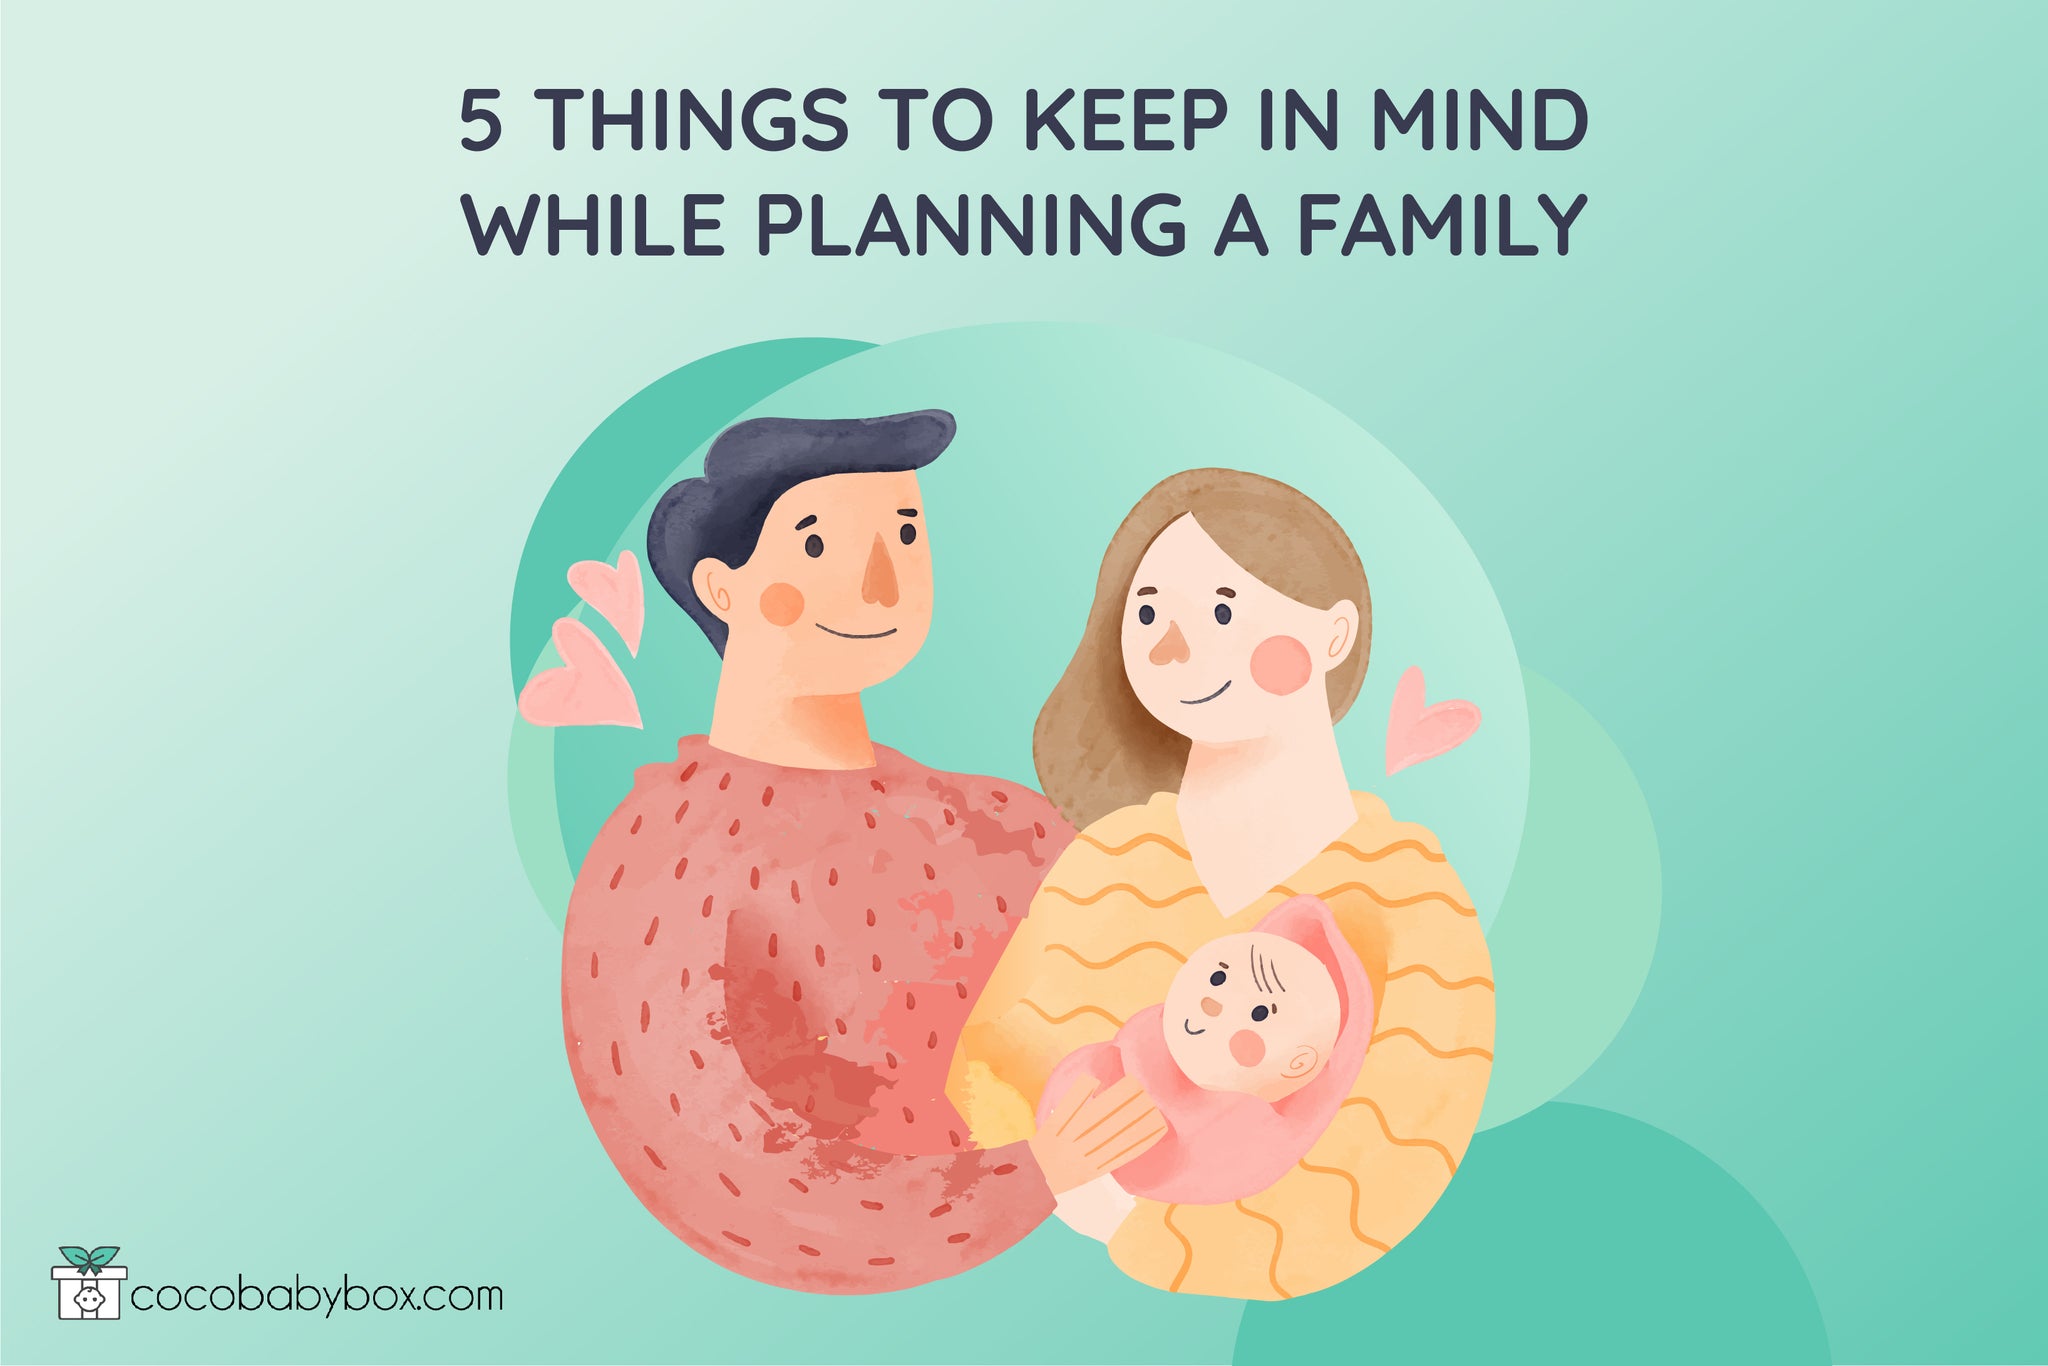 5 things to keep in mind while planning a family